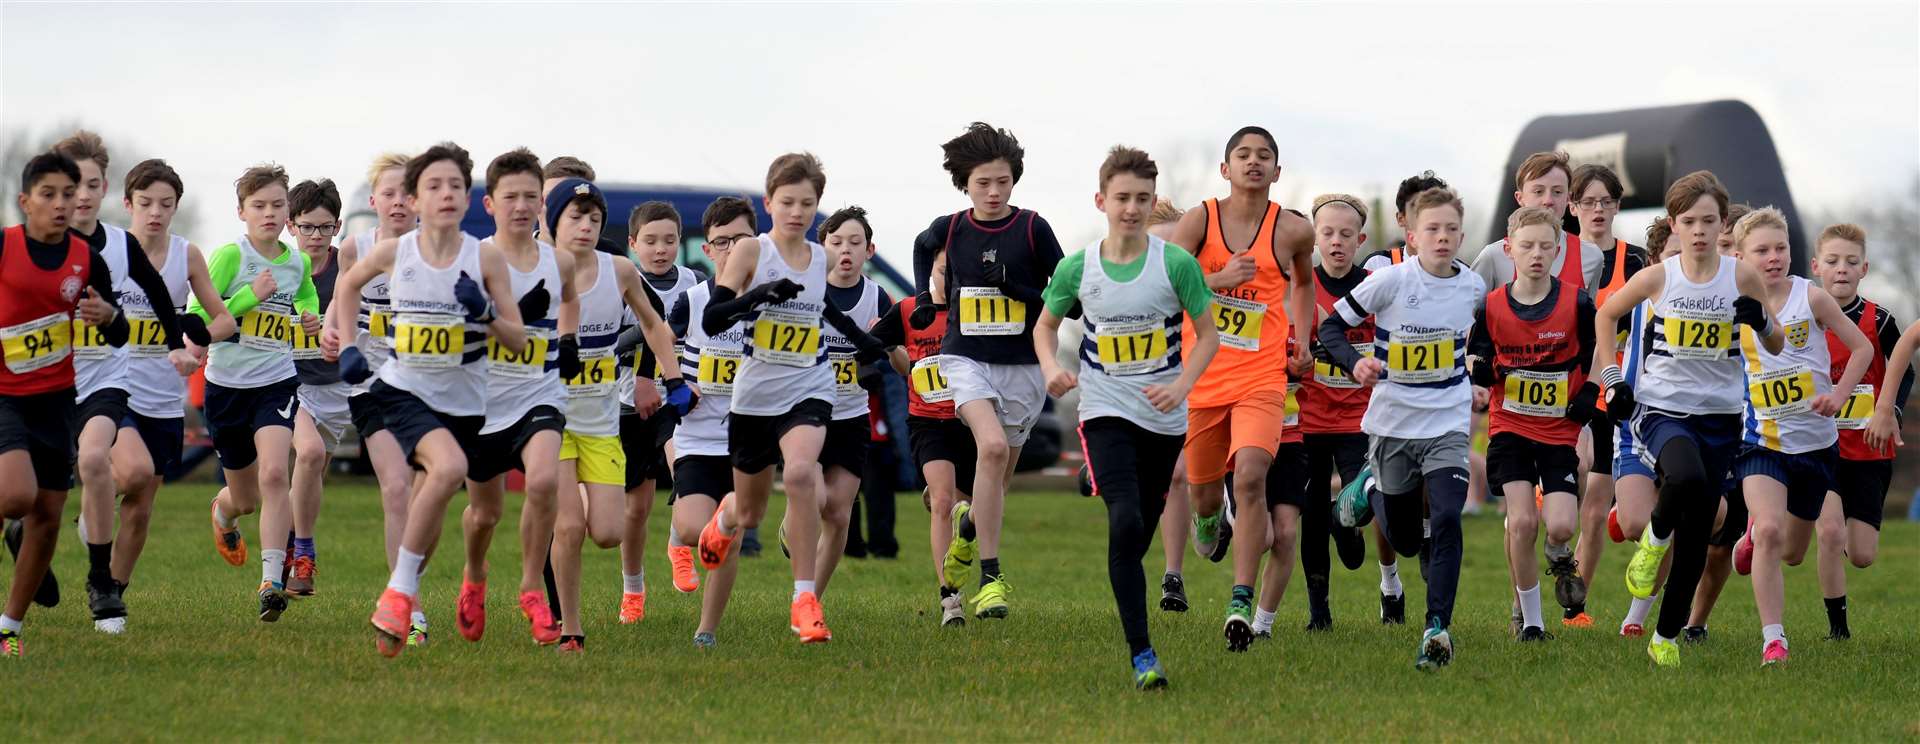 Action from the under-13 boys’ race. Picture: Barry Goodwin